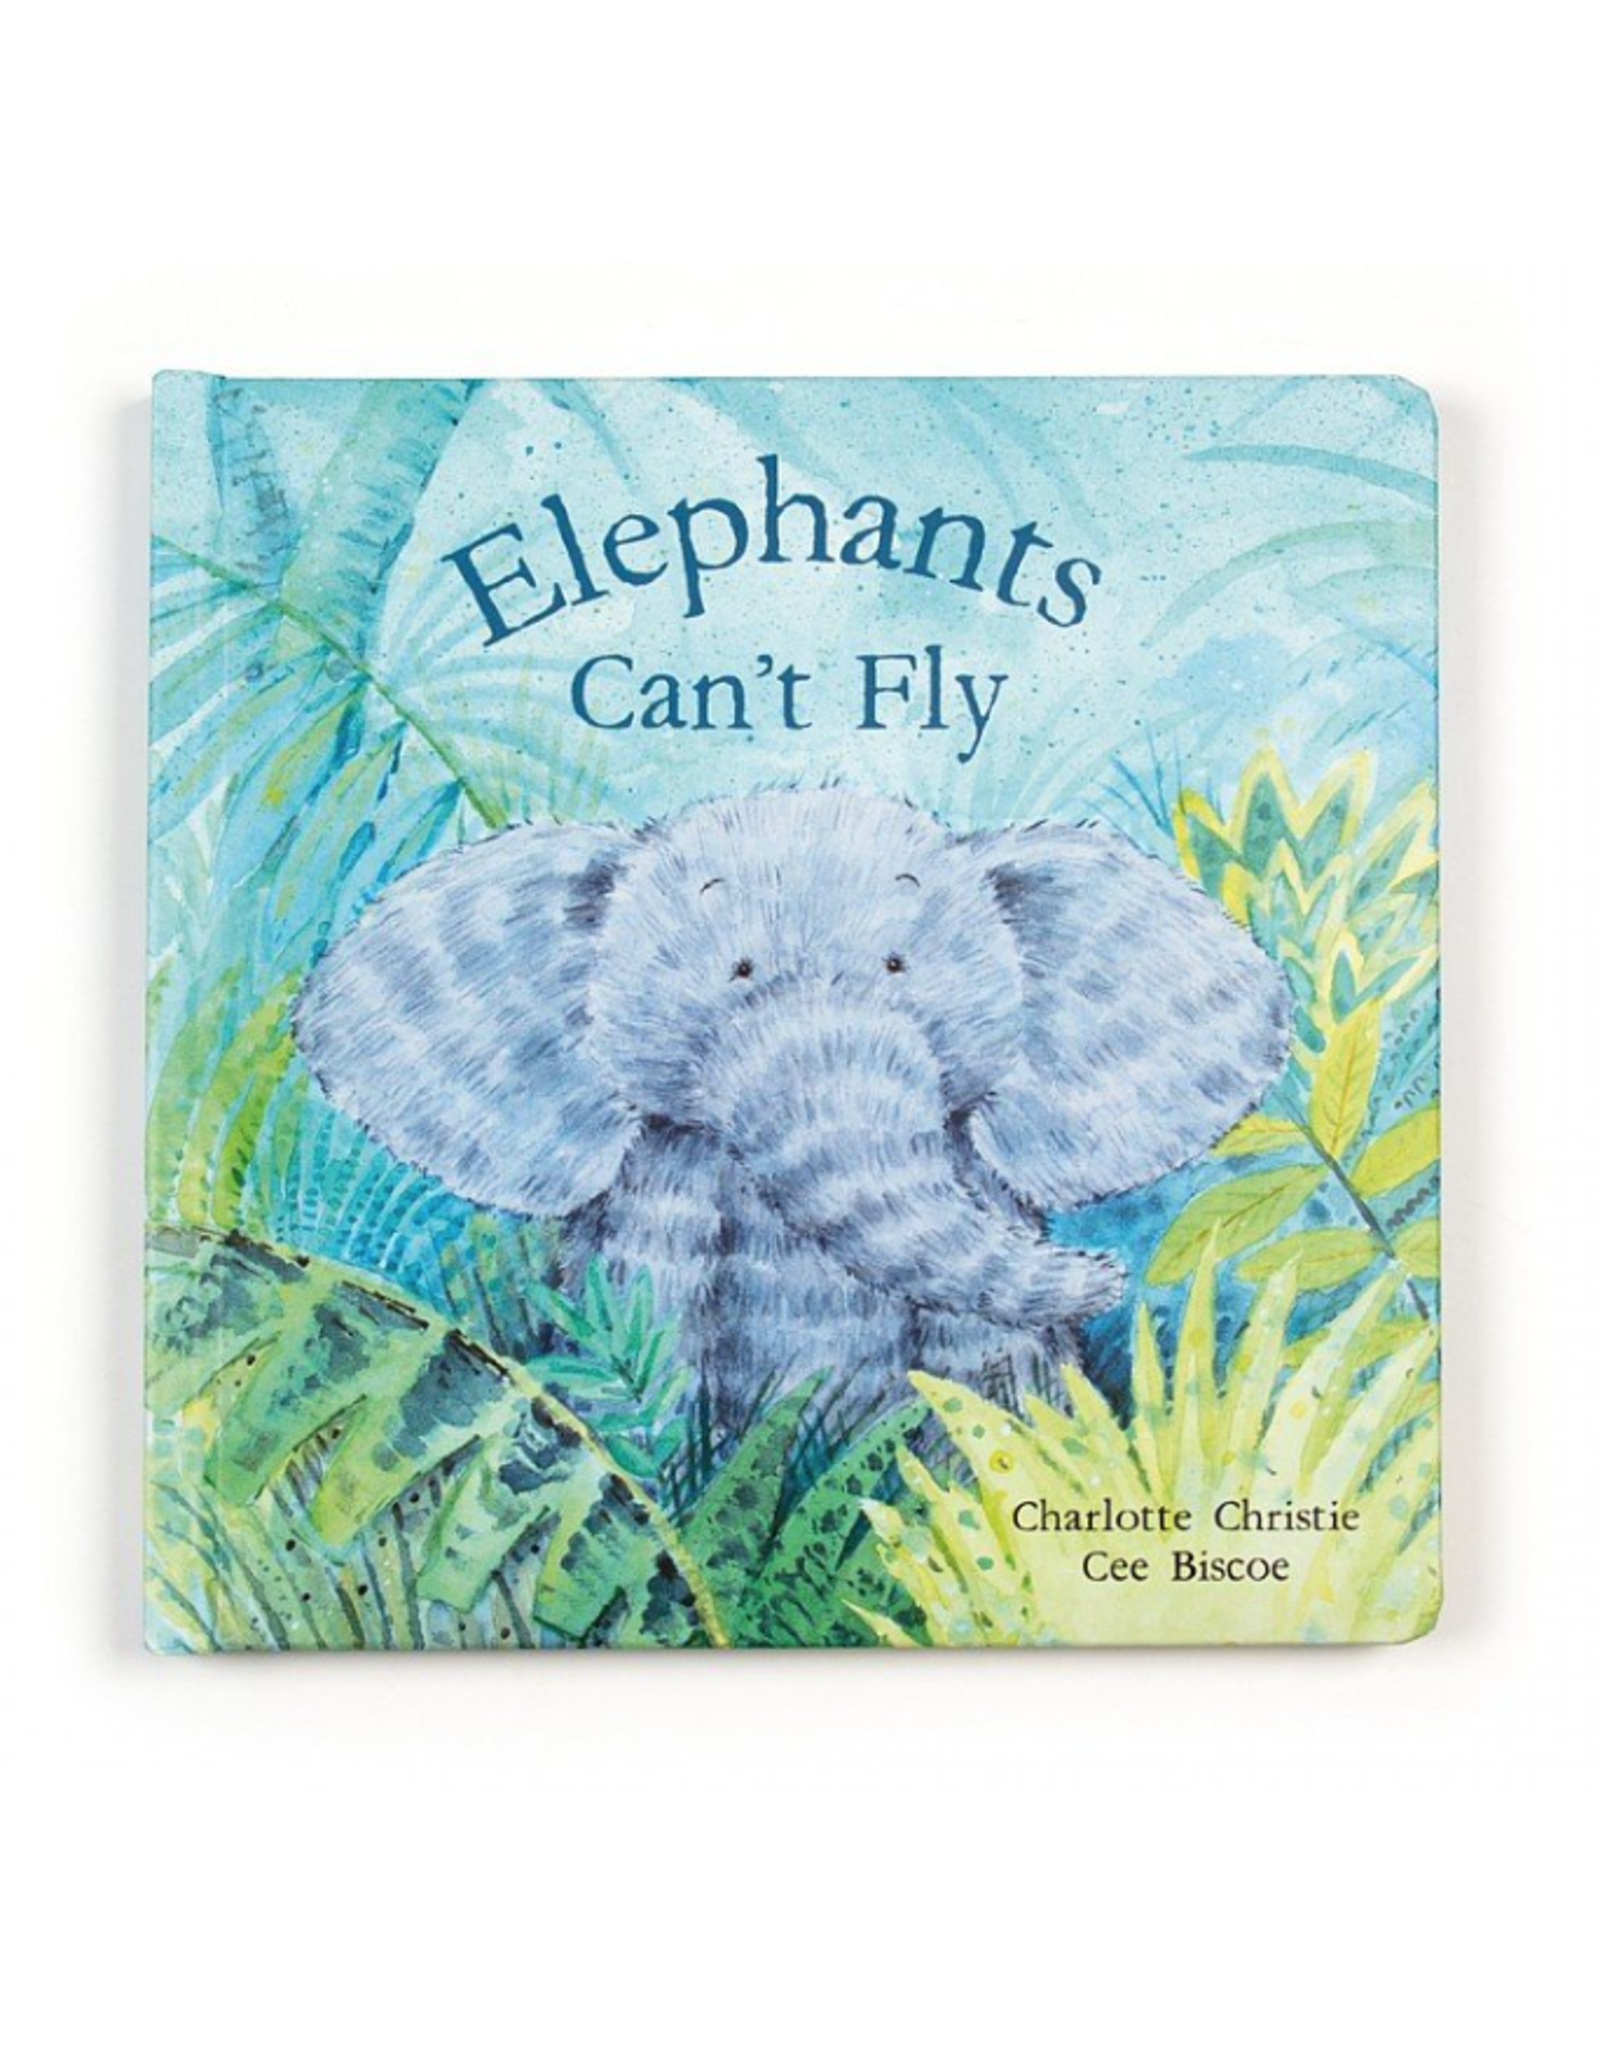 Book Elephants Can't Fly